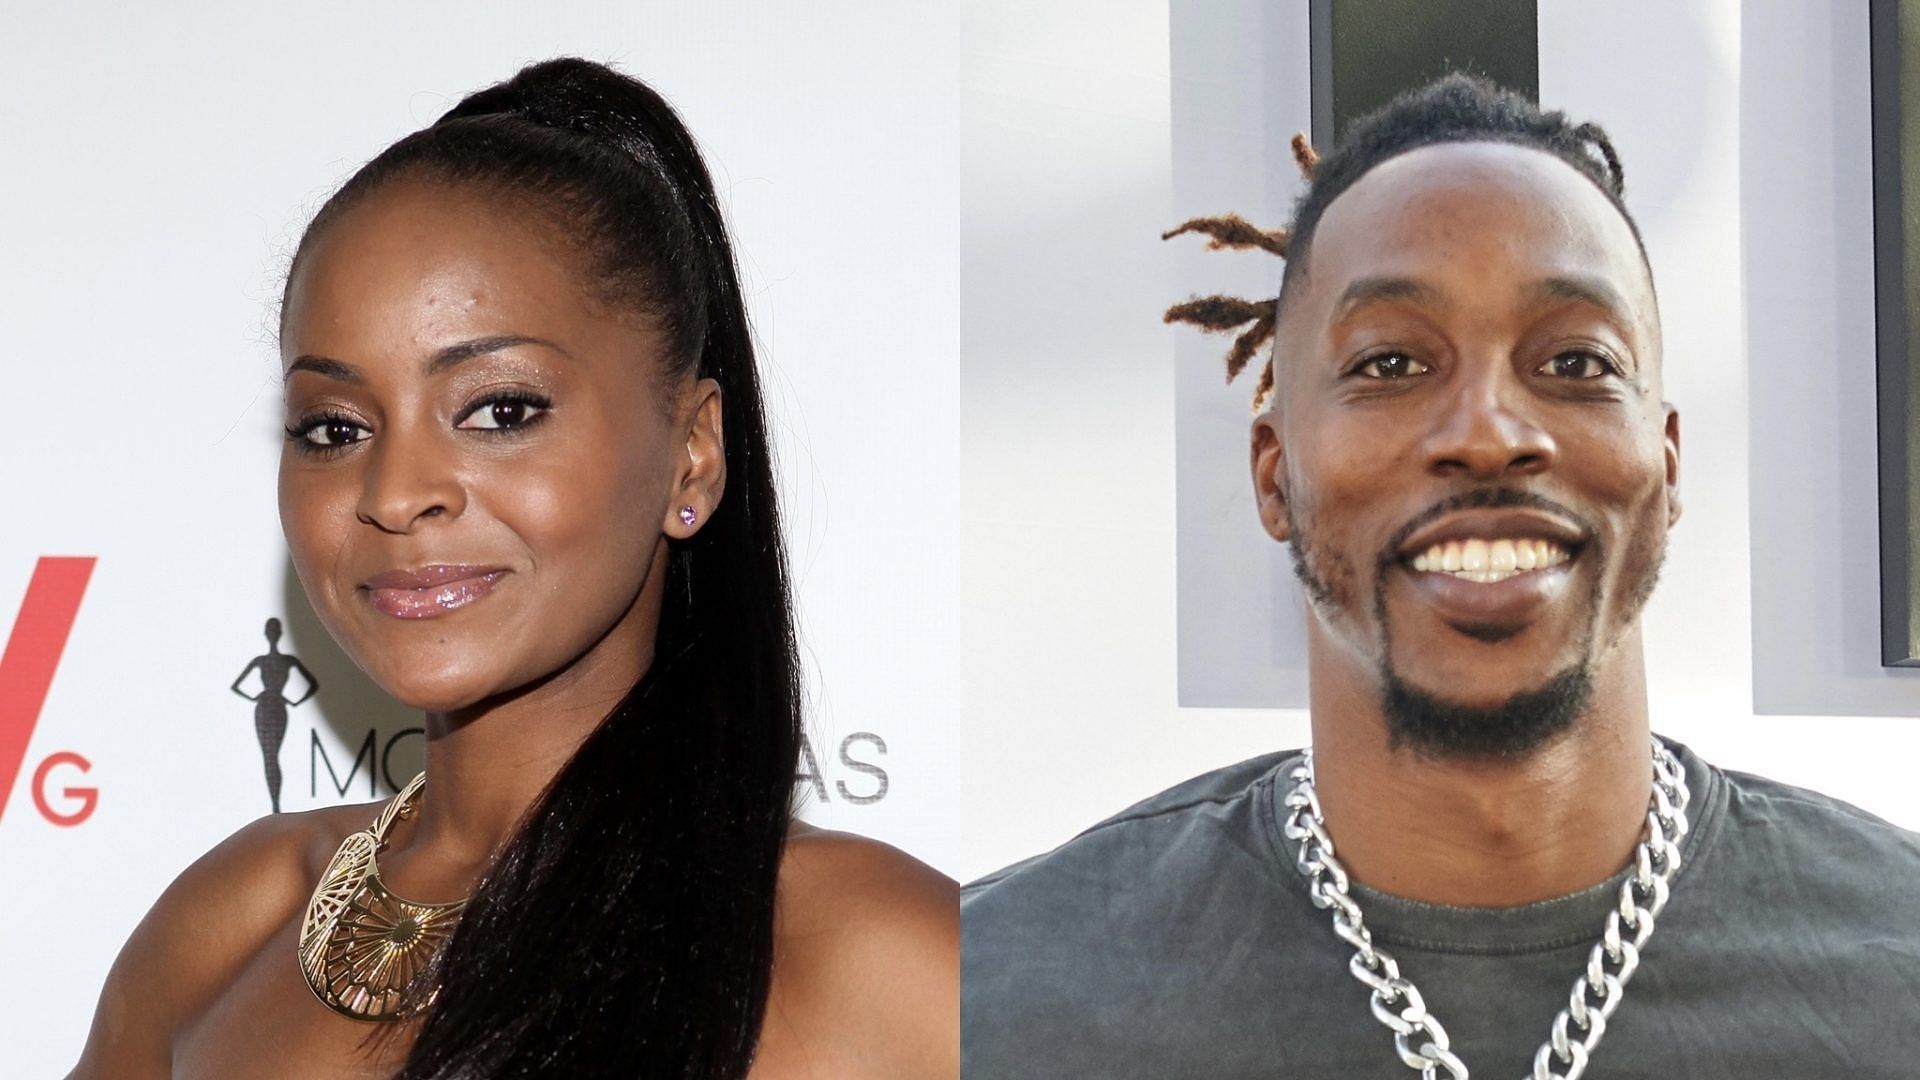 Dwight Howard's ex Royce Reed reveals he threatened her with knife: 